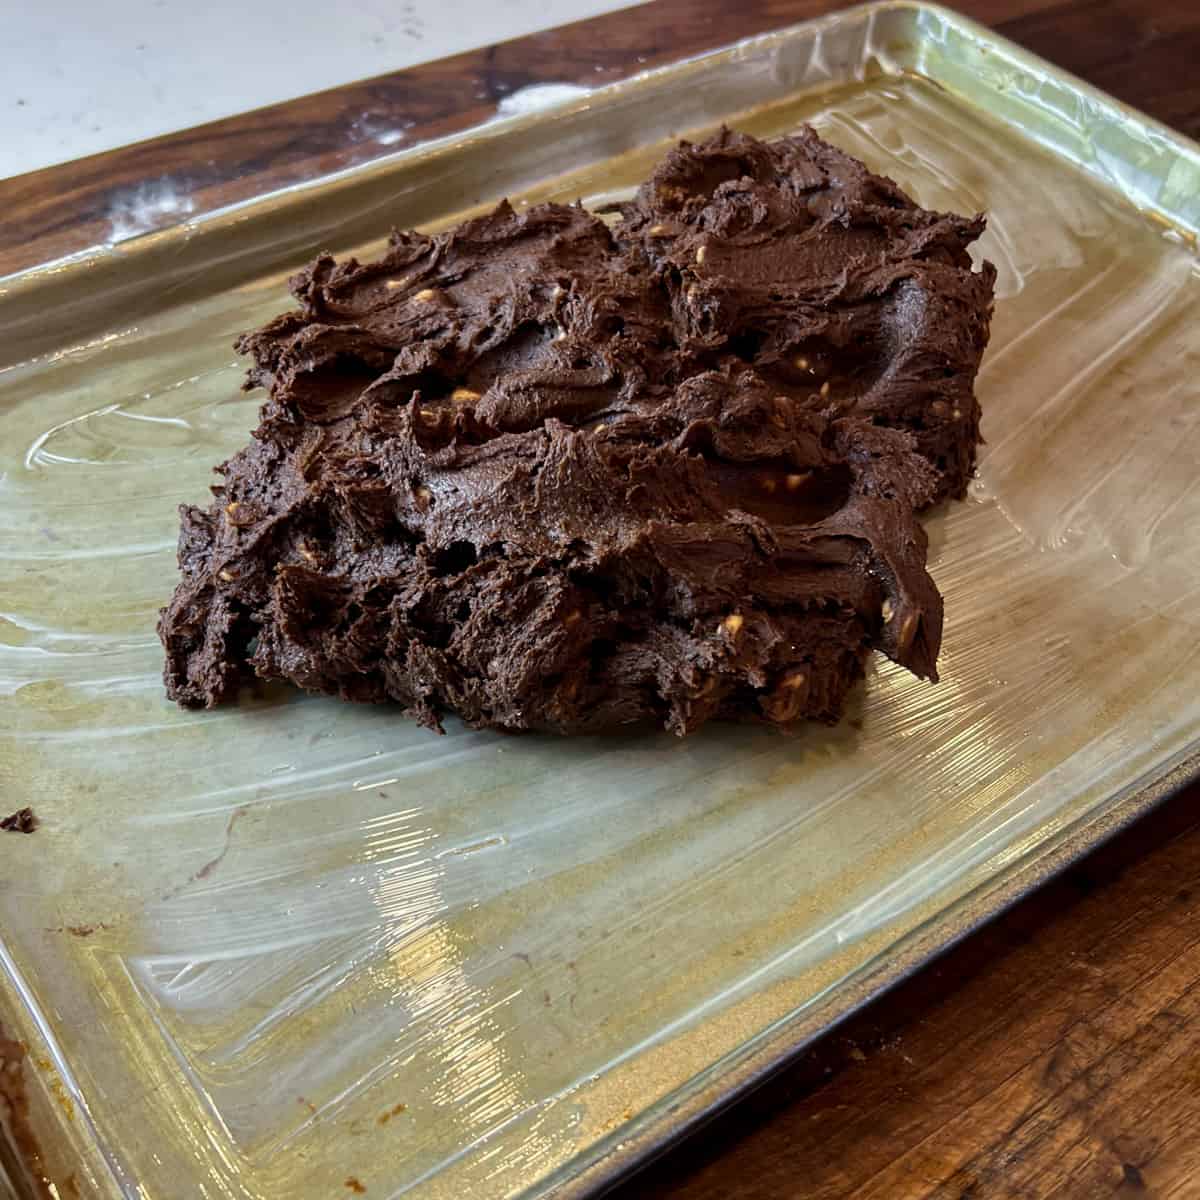 Spreading cookie dough on a baking sheet.